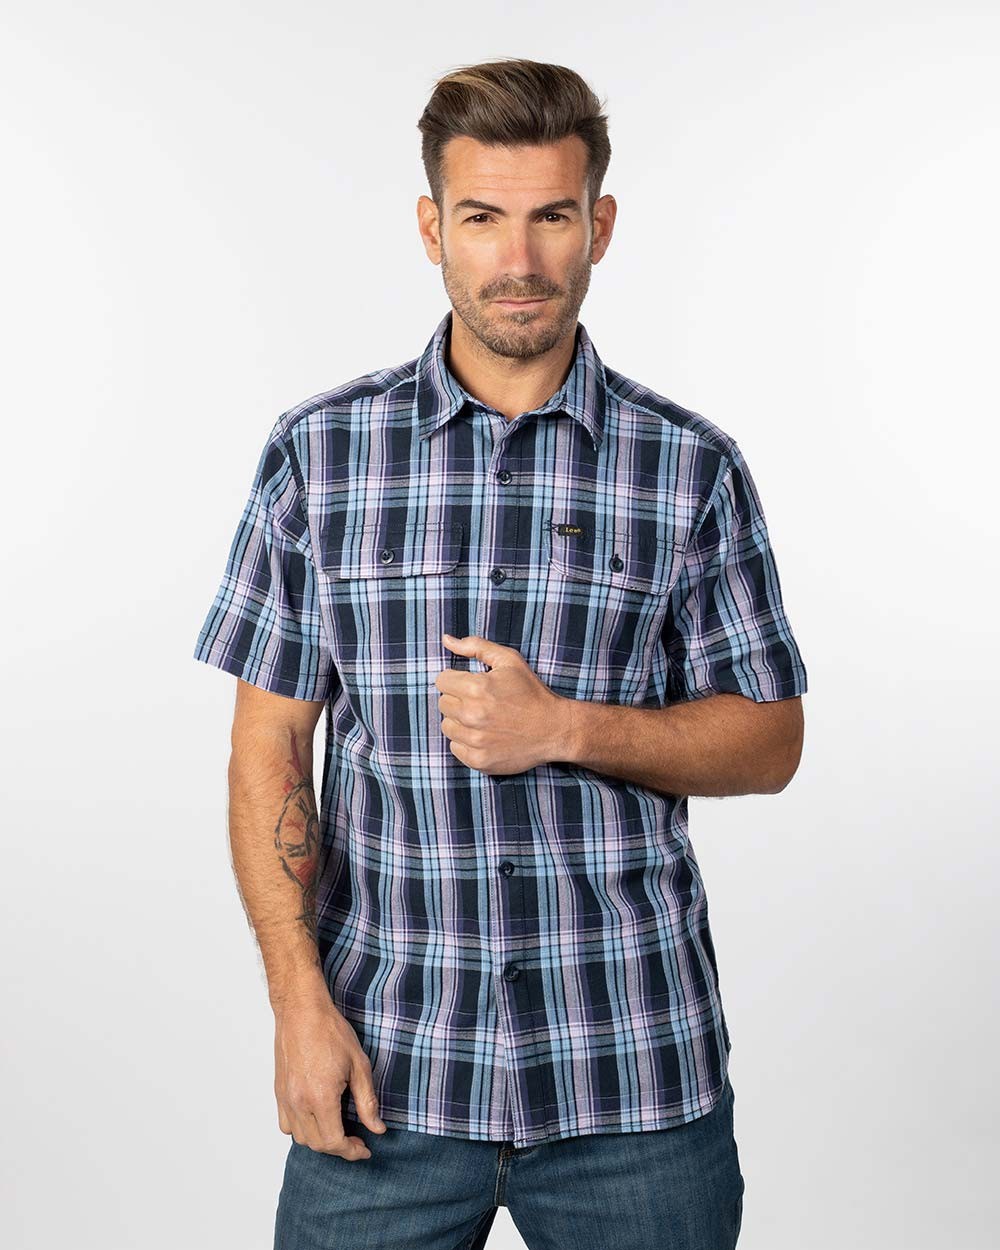 LEE All Purpose Worker Shirt